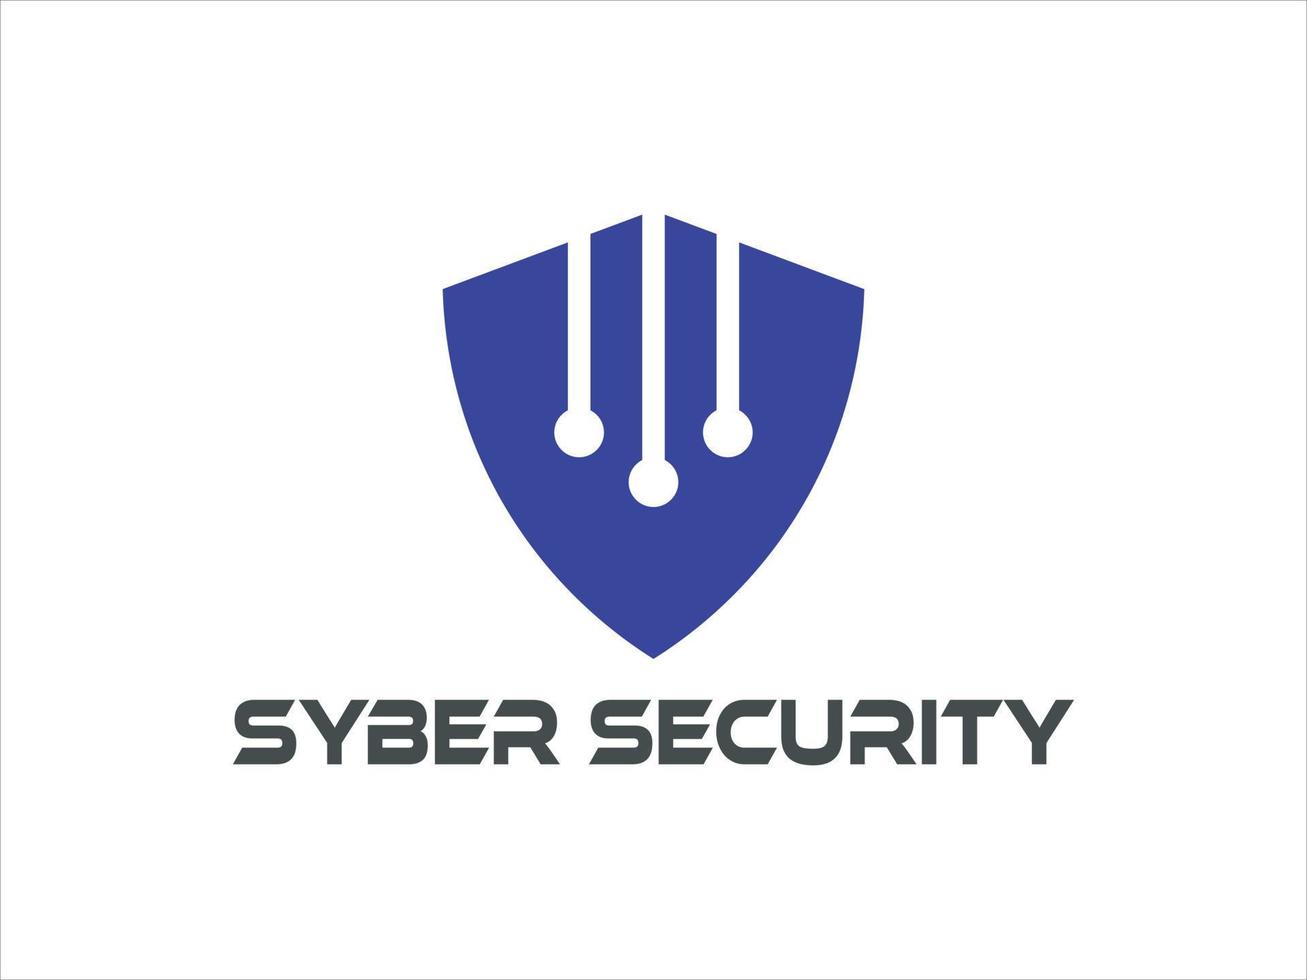 cyber security logo technology for your company, shield logo for security data vector